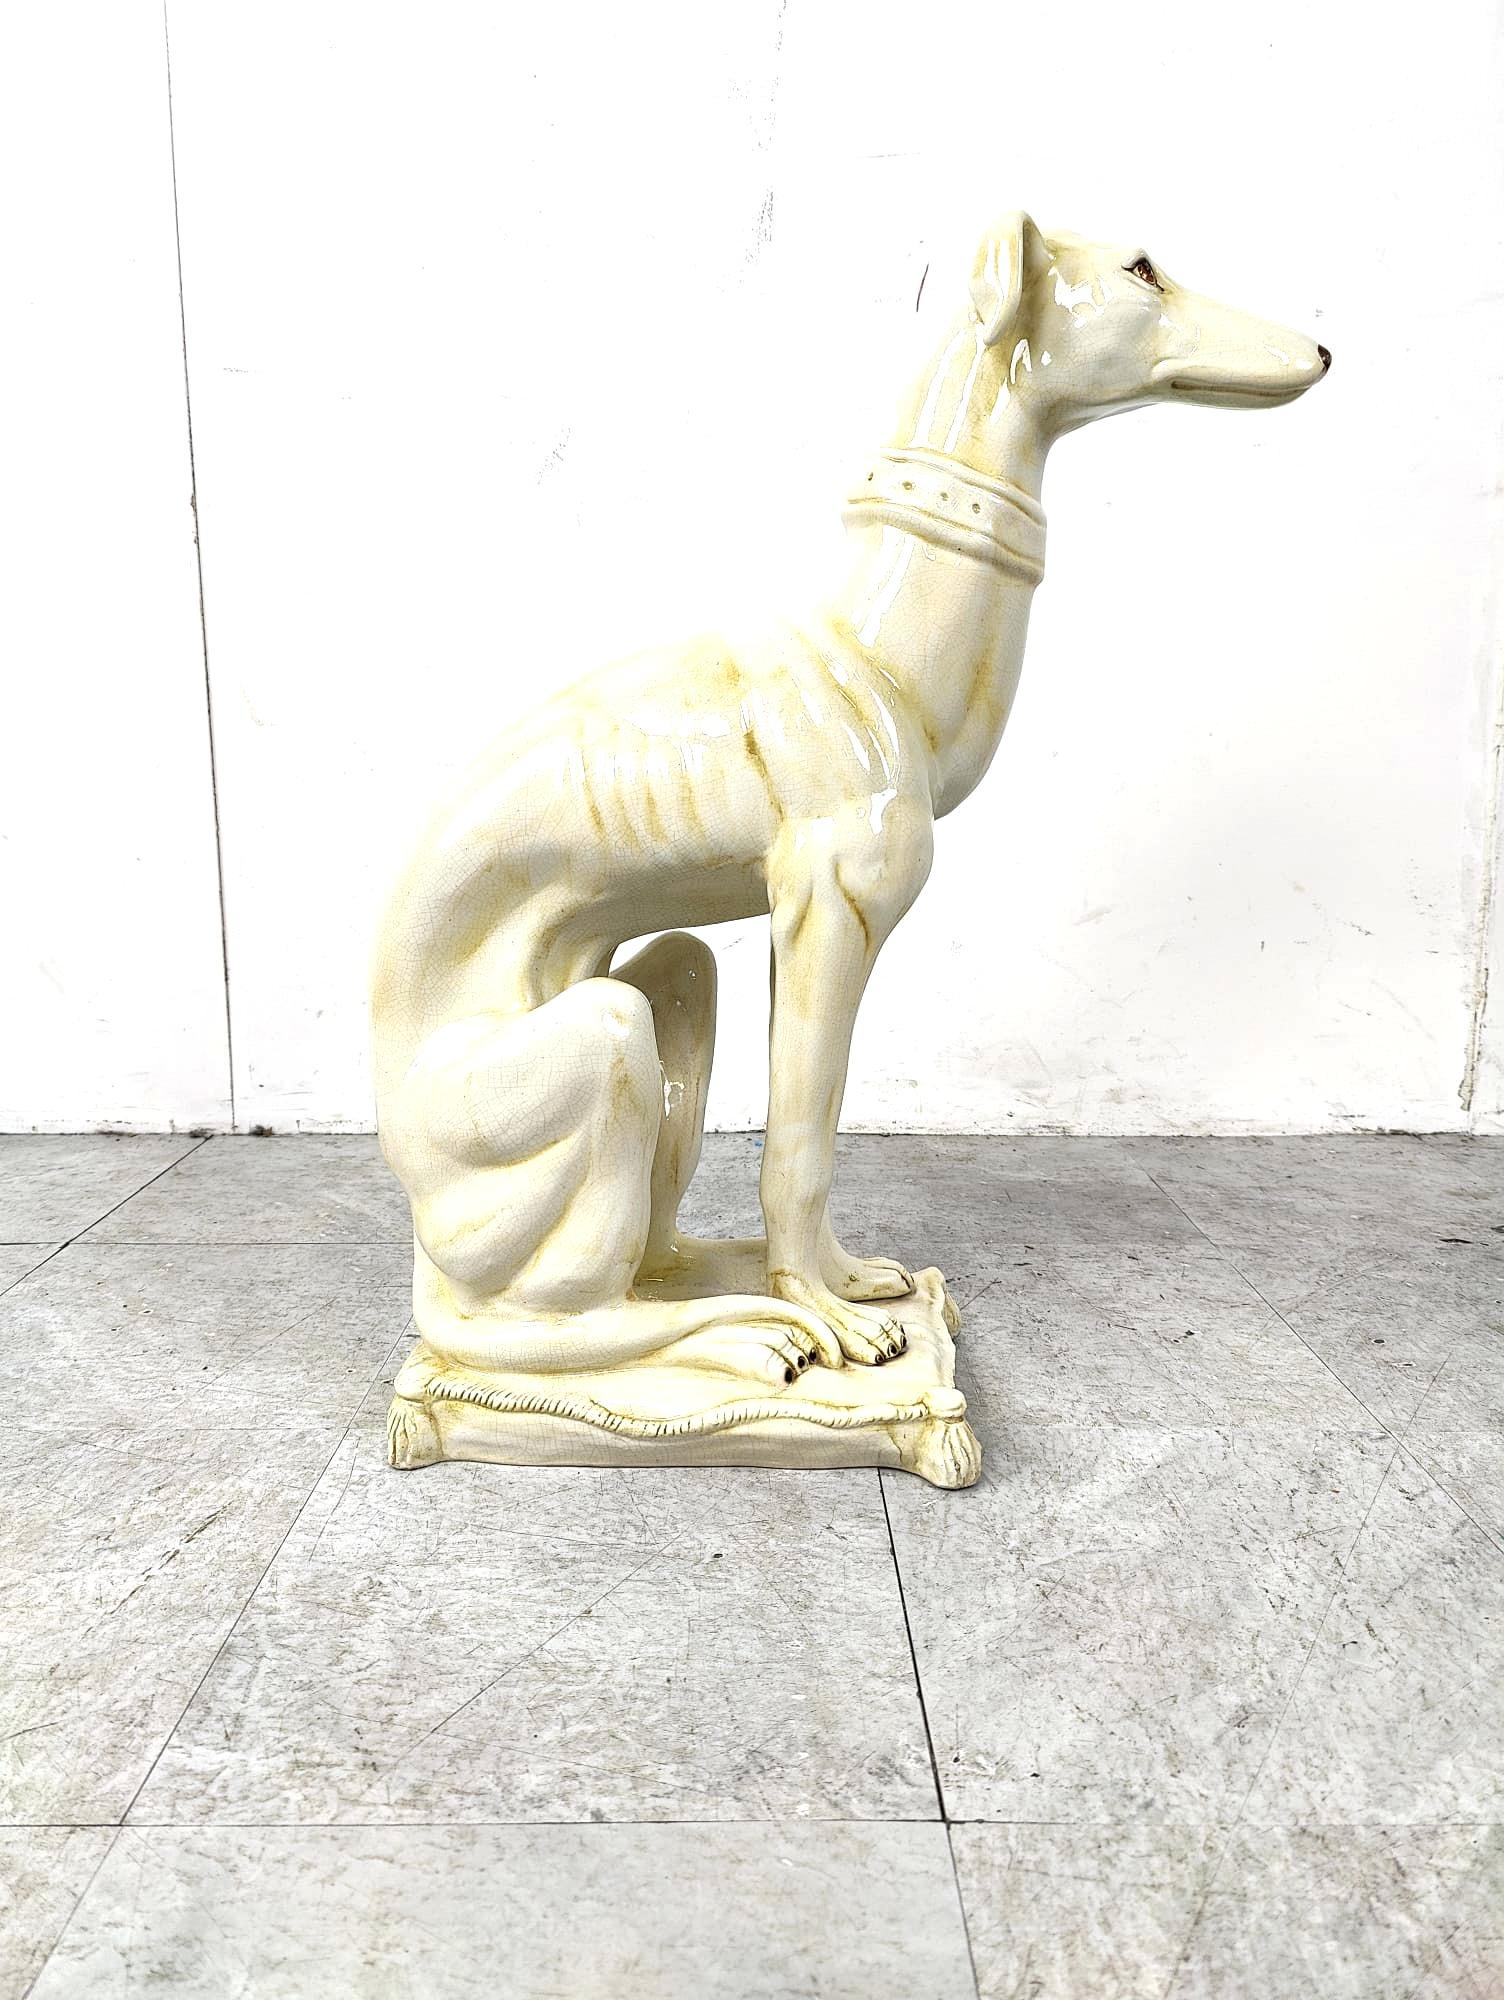 Gorgeous and naturally sculpted sculpture of a sitting greyhoudn made from cracklé ceramic and made in italy.

Beautiful and elegant posture sitting on a cushion.

Good condition

1960s - Italy

Height: 67cm
With: 26cm
Depth: 45cm

Ref.: 249552